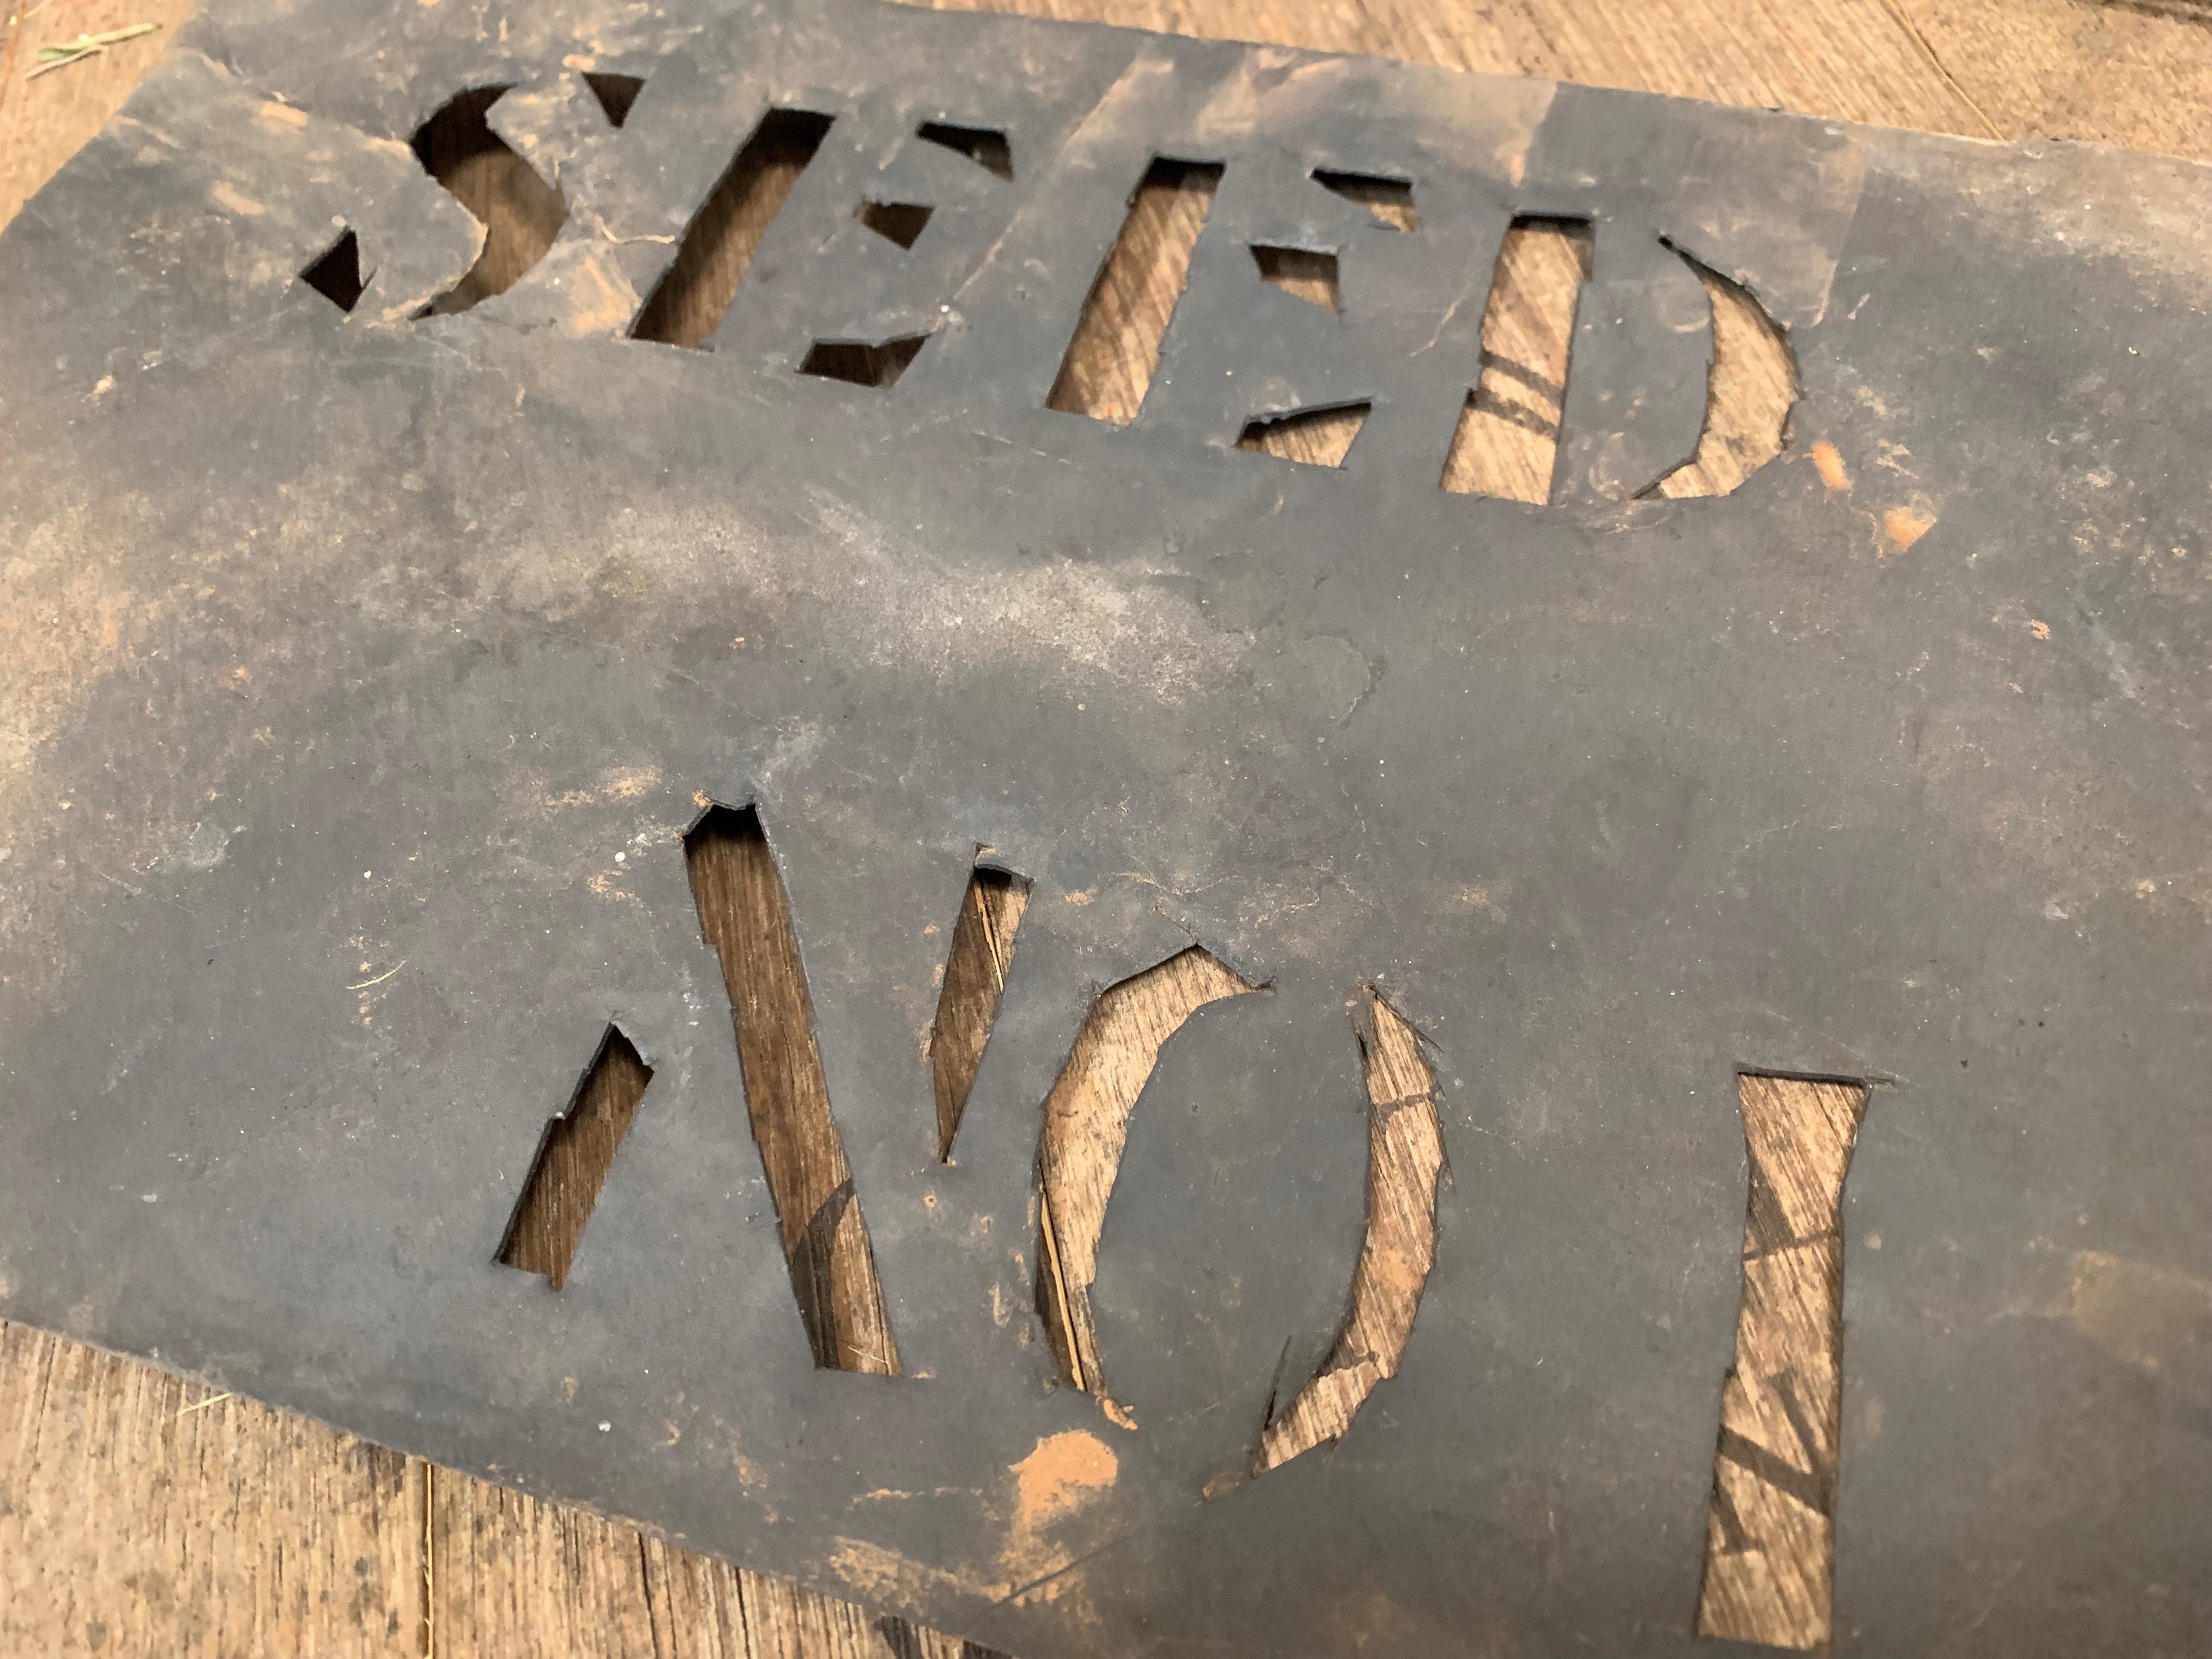 Vintage SEED Shed Stencil